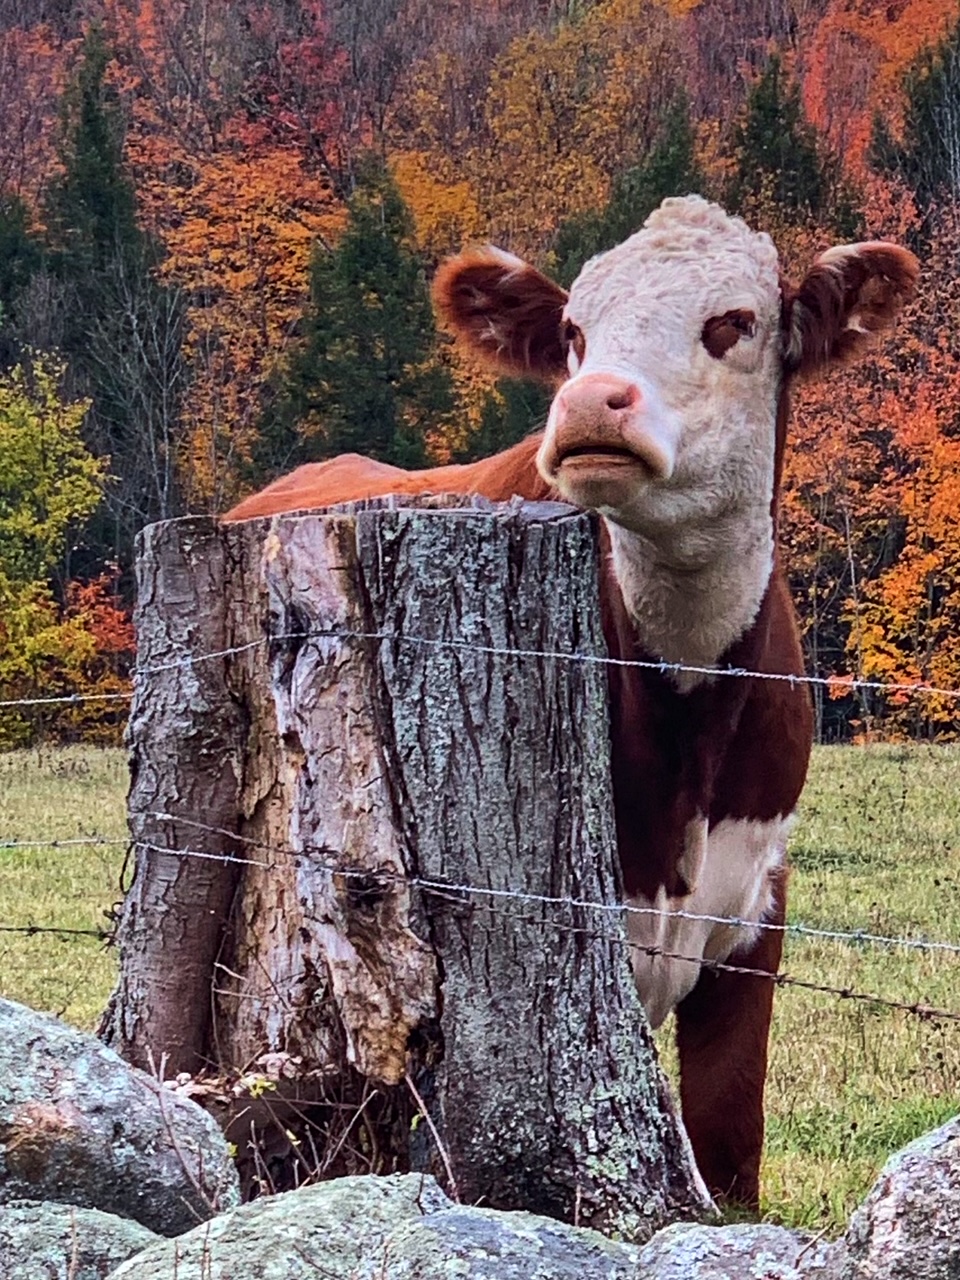 A Hersey Farm Cow Poses with a Backdrop of Fall Folliage | The Andover